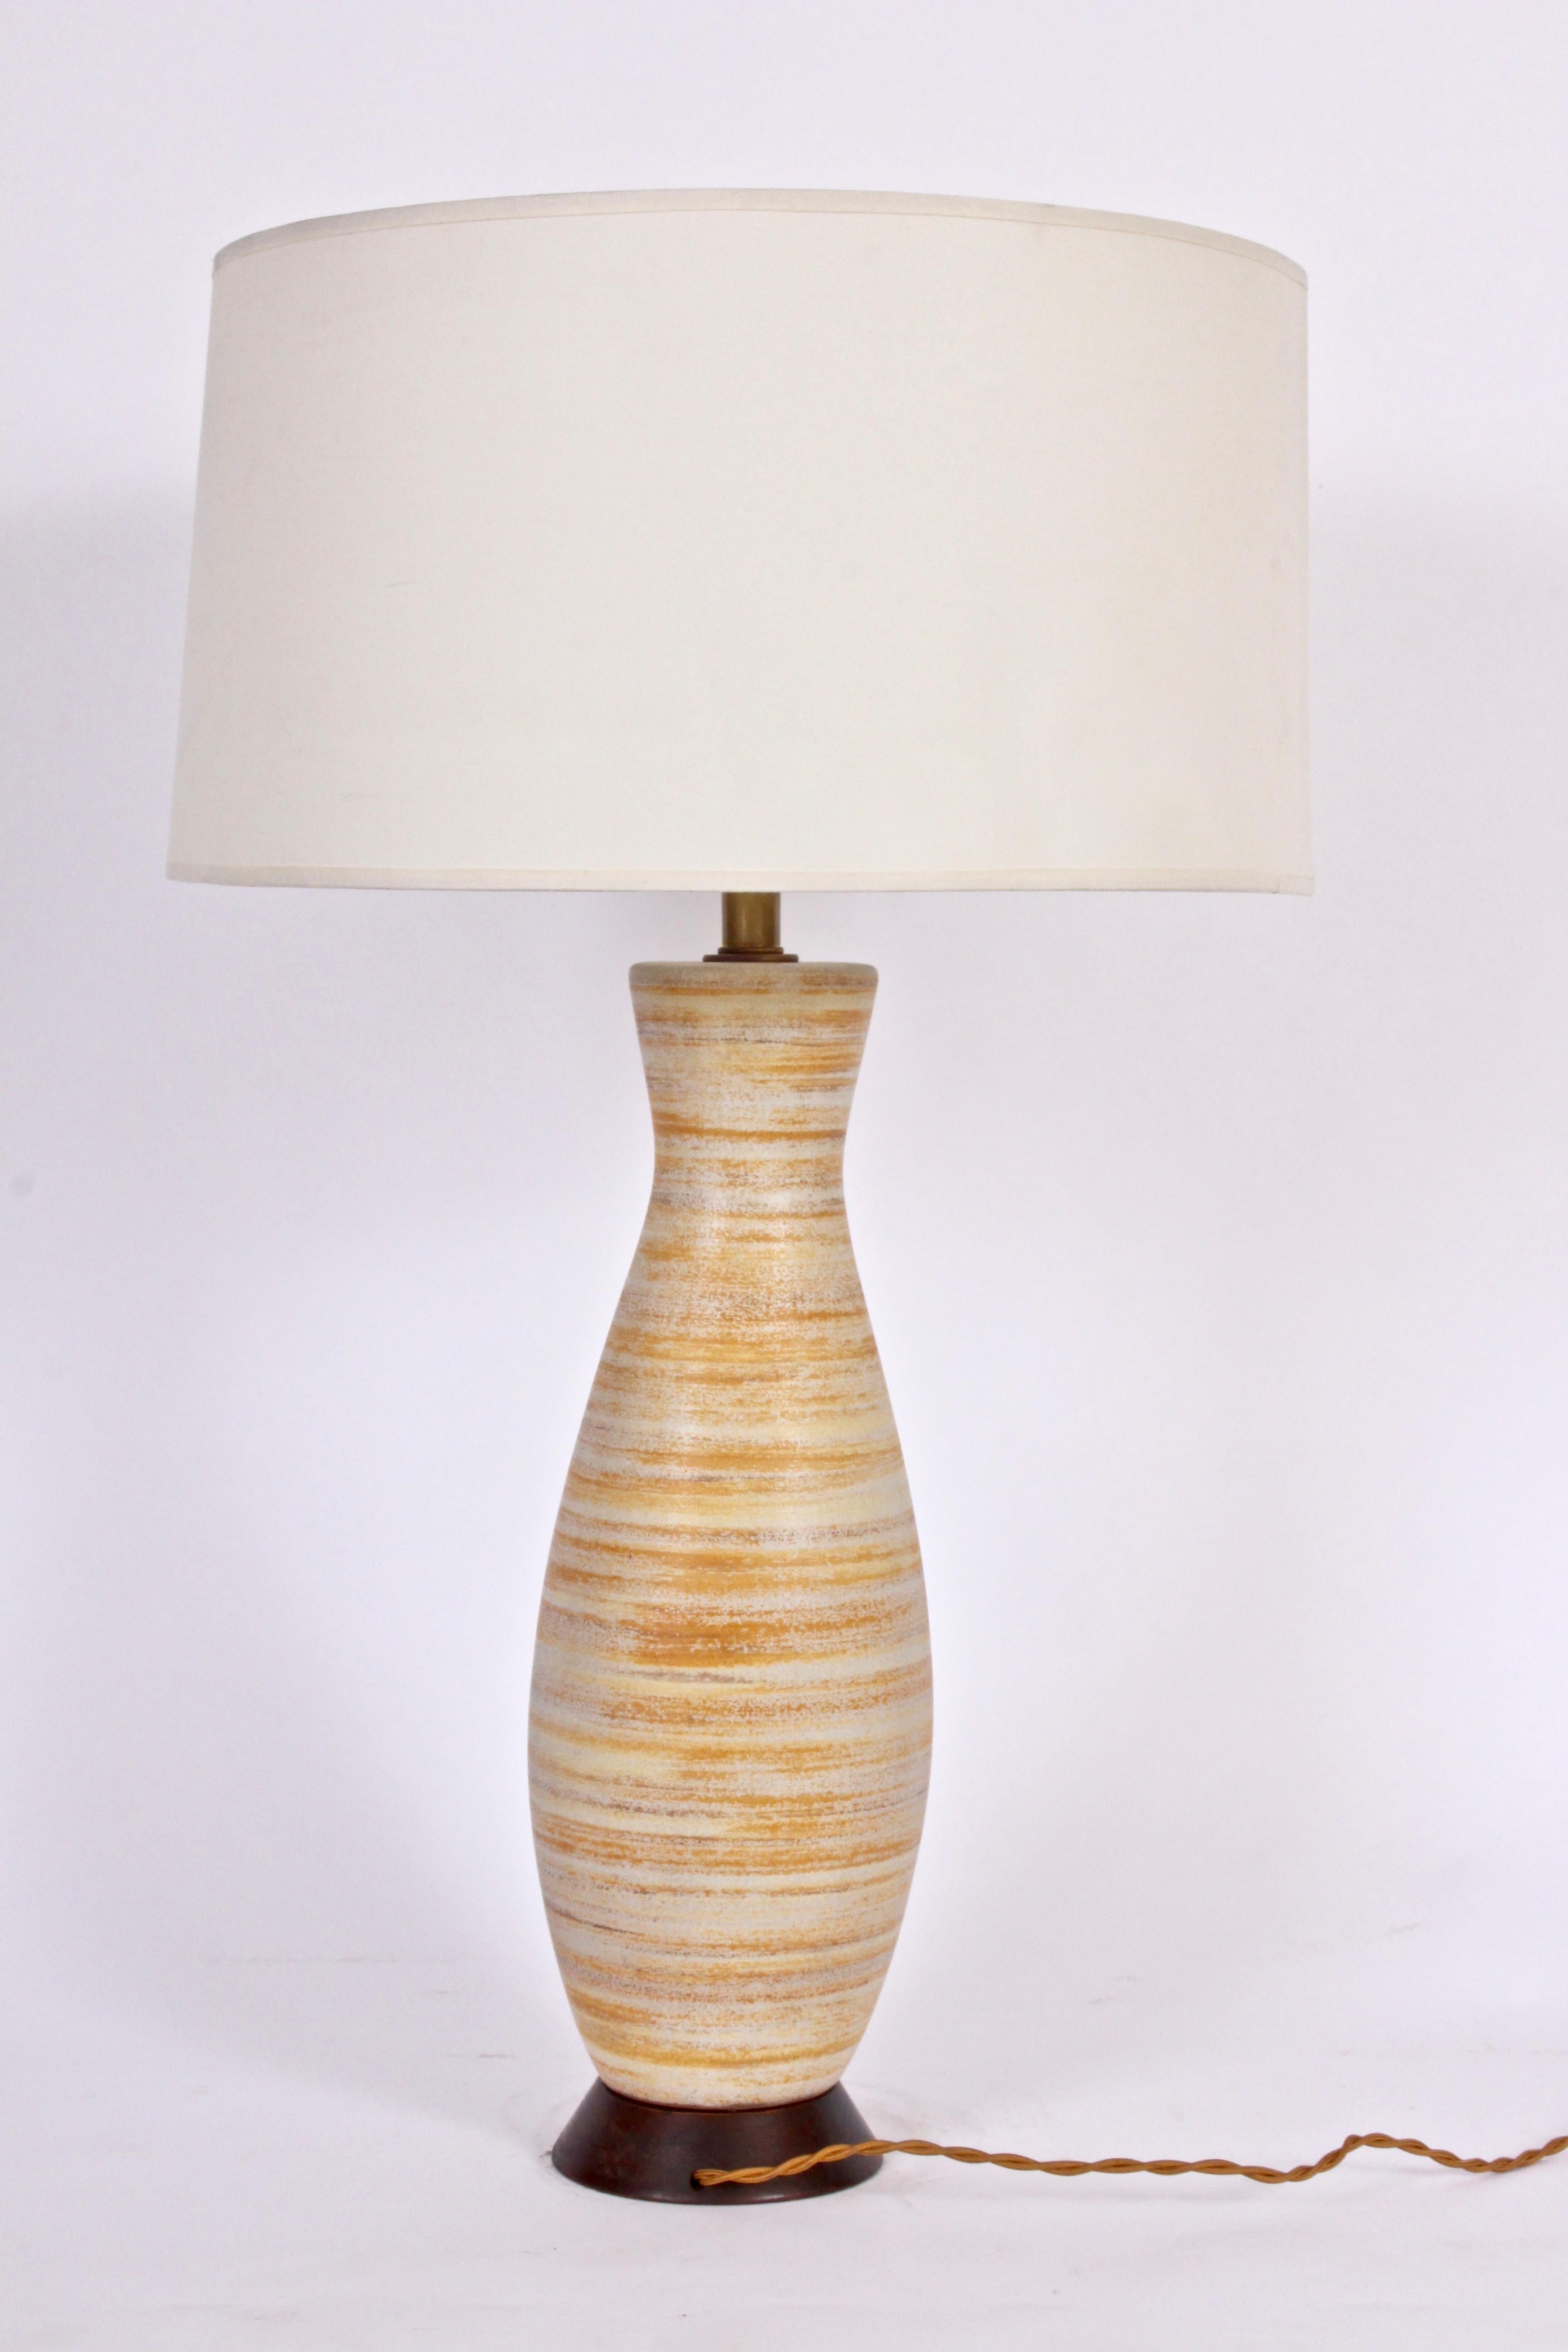 Substantial Lee Rosen for Design Technics hand-painted ceramic table lamp, 1950's. Featuring a hand crafted corseted classic DT pottery bottle form with hand-painted horizontal banding in subtle soft orange, pale yellow, brown, off-white, cream.